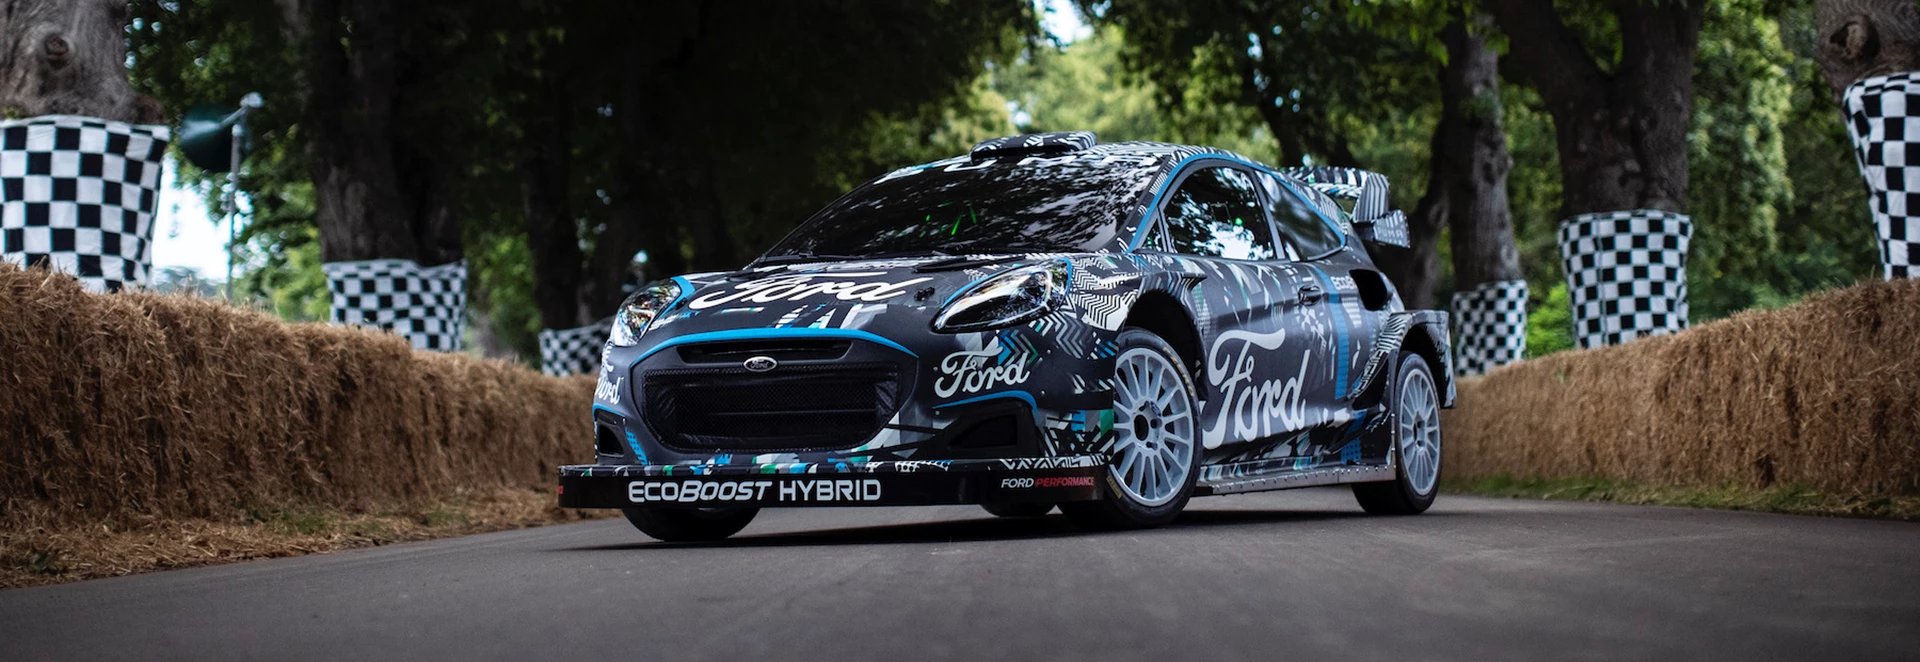 M-Sport Ford Puma Rally1 WRC Prototype showcased at Goodwood Festival of Speed 